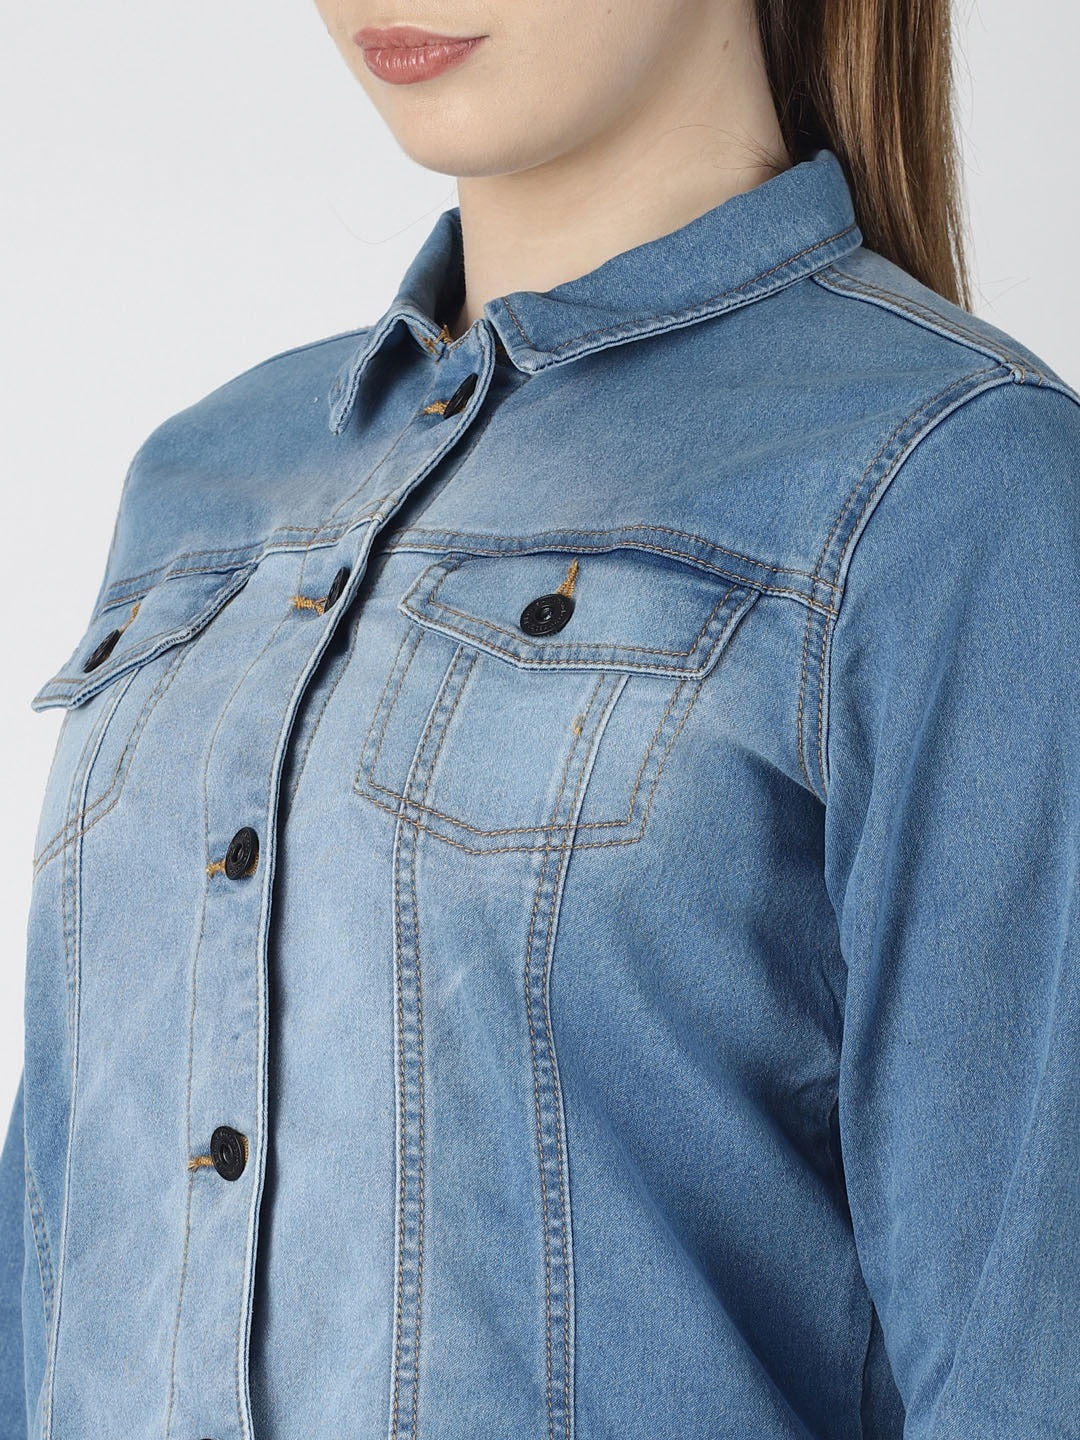 Stylish blue denim jacket for women, featuring a classic design with button closure and front pockets.